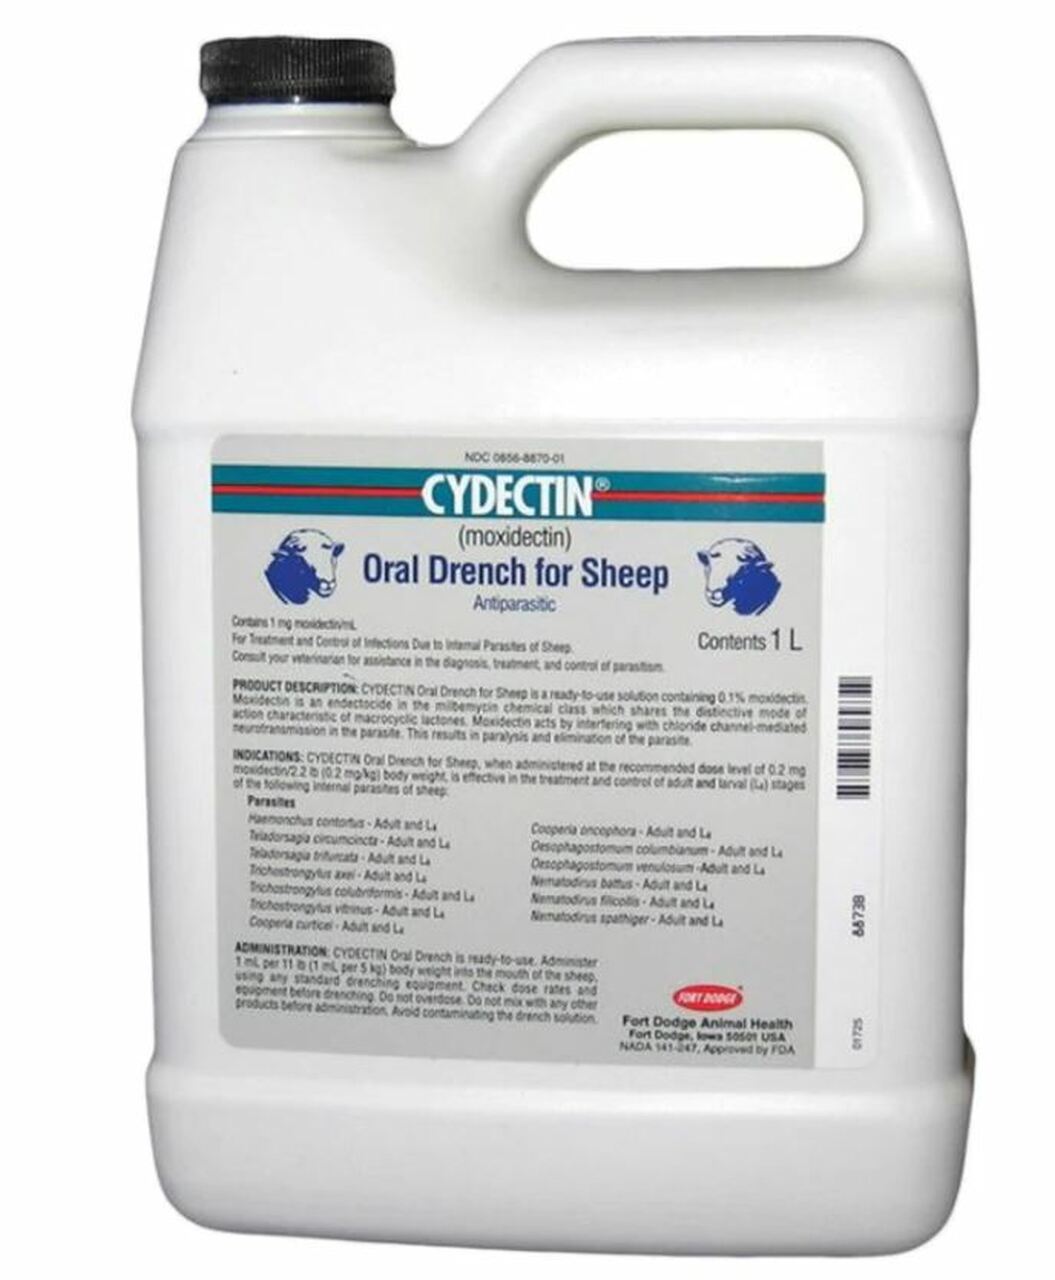 Bayer, Cydectin Oral Drench For Sheep, 1 L.